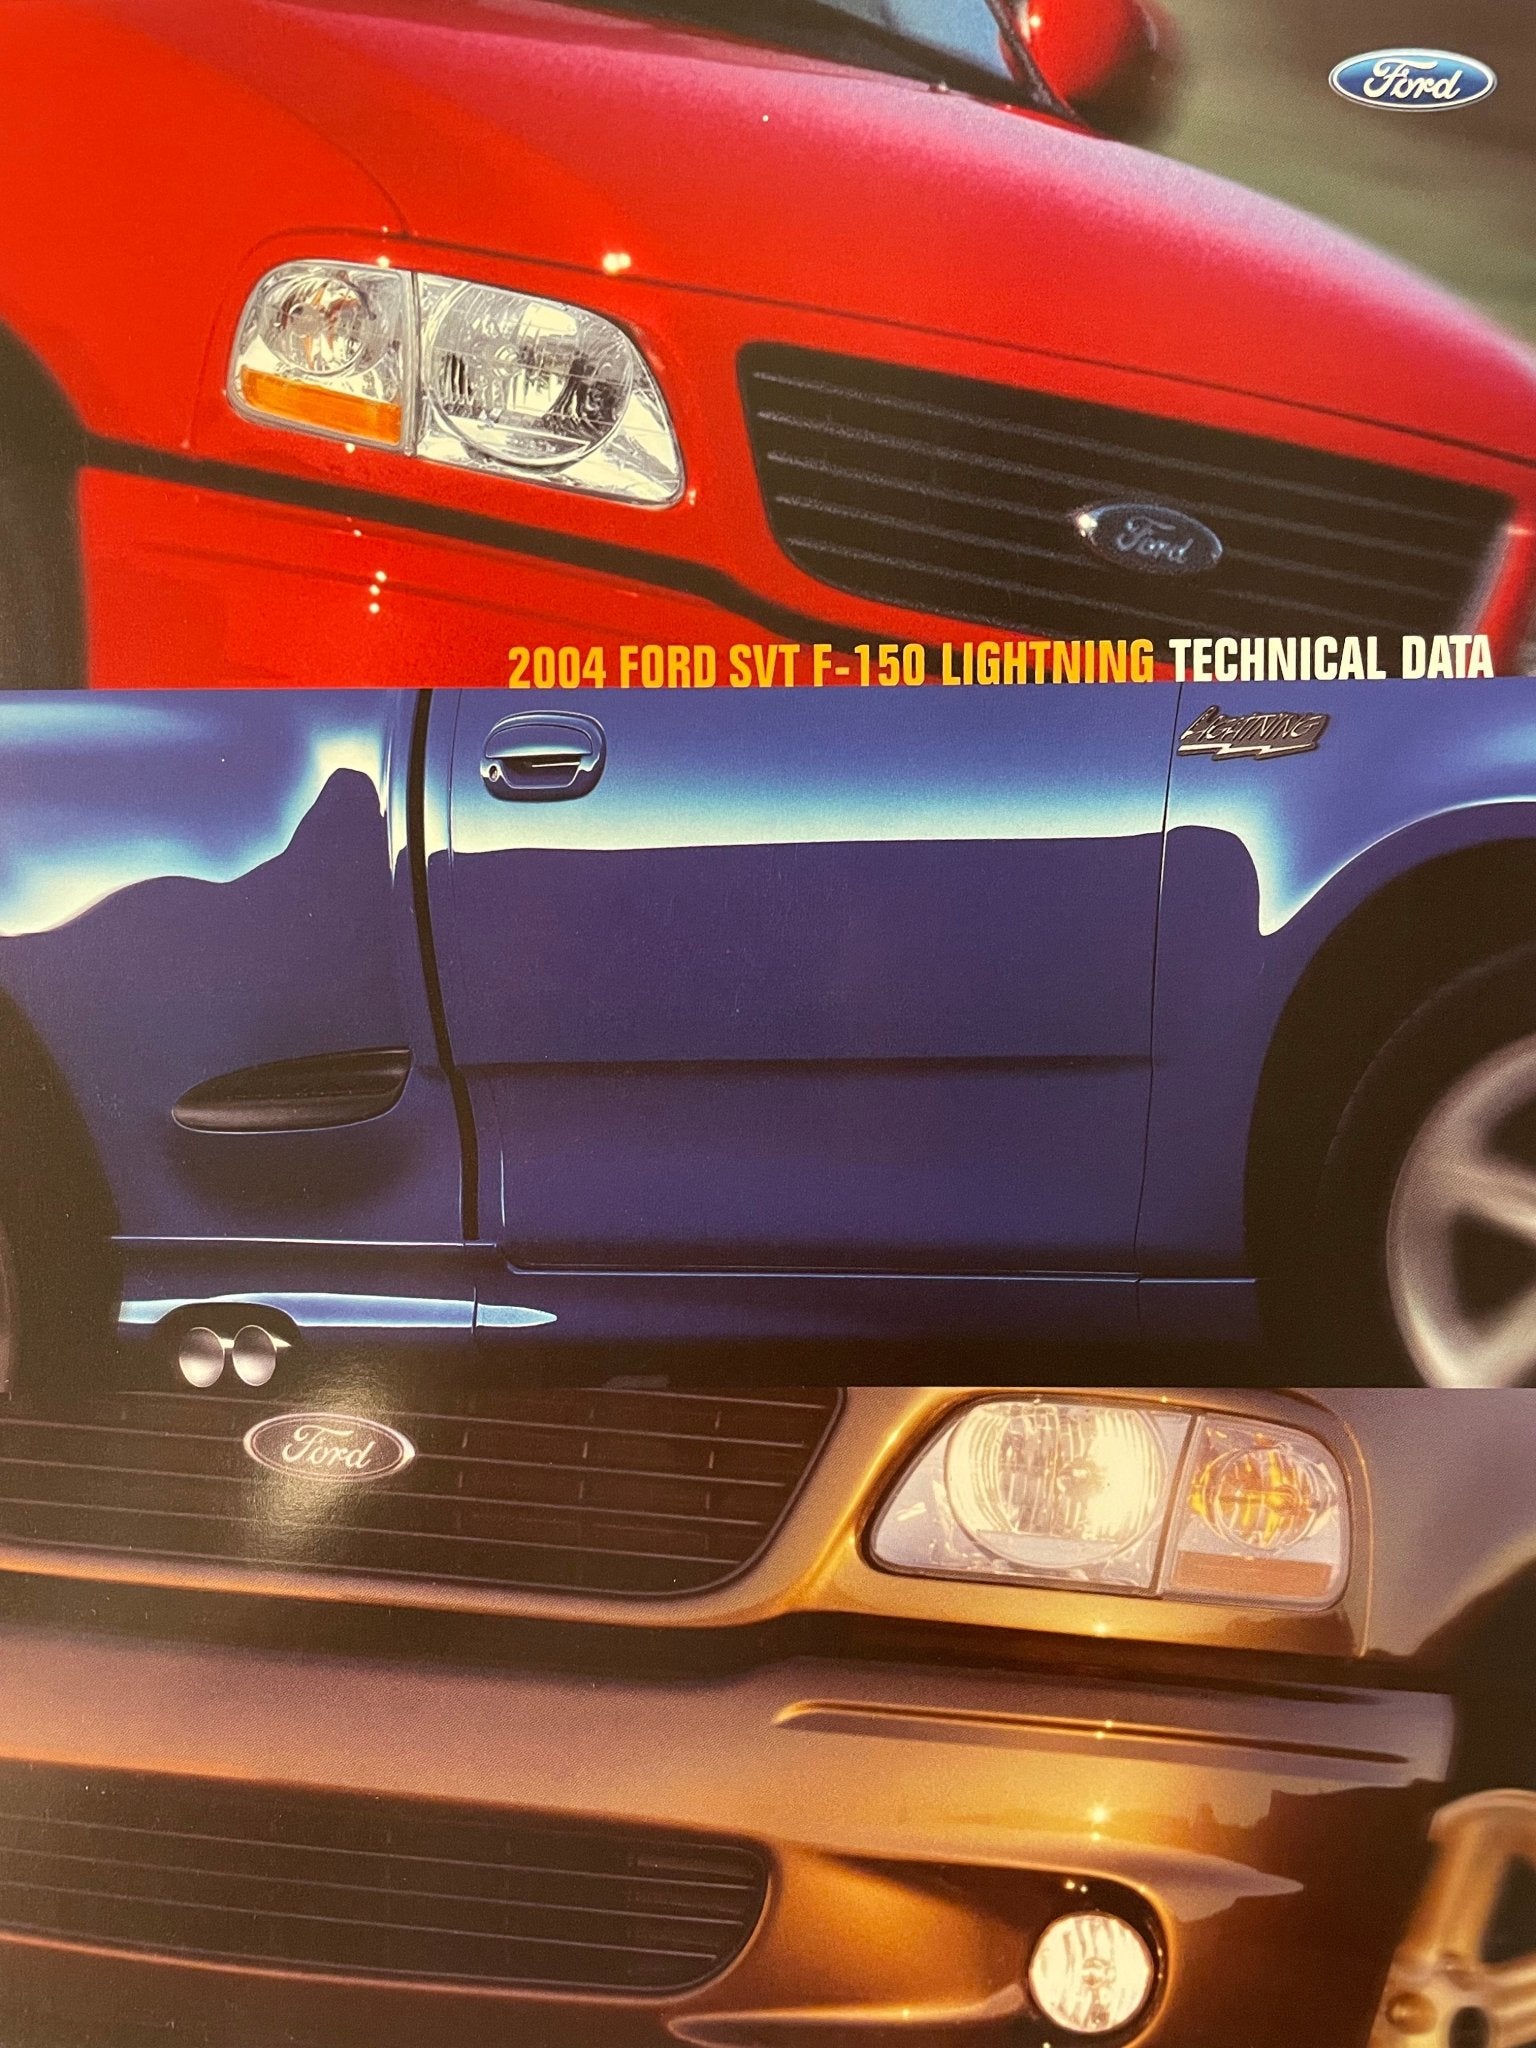 2004 Lightning Tech Data Card - Ford Show Parts